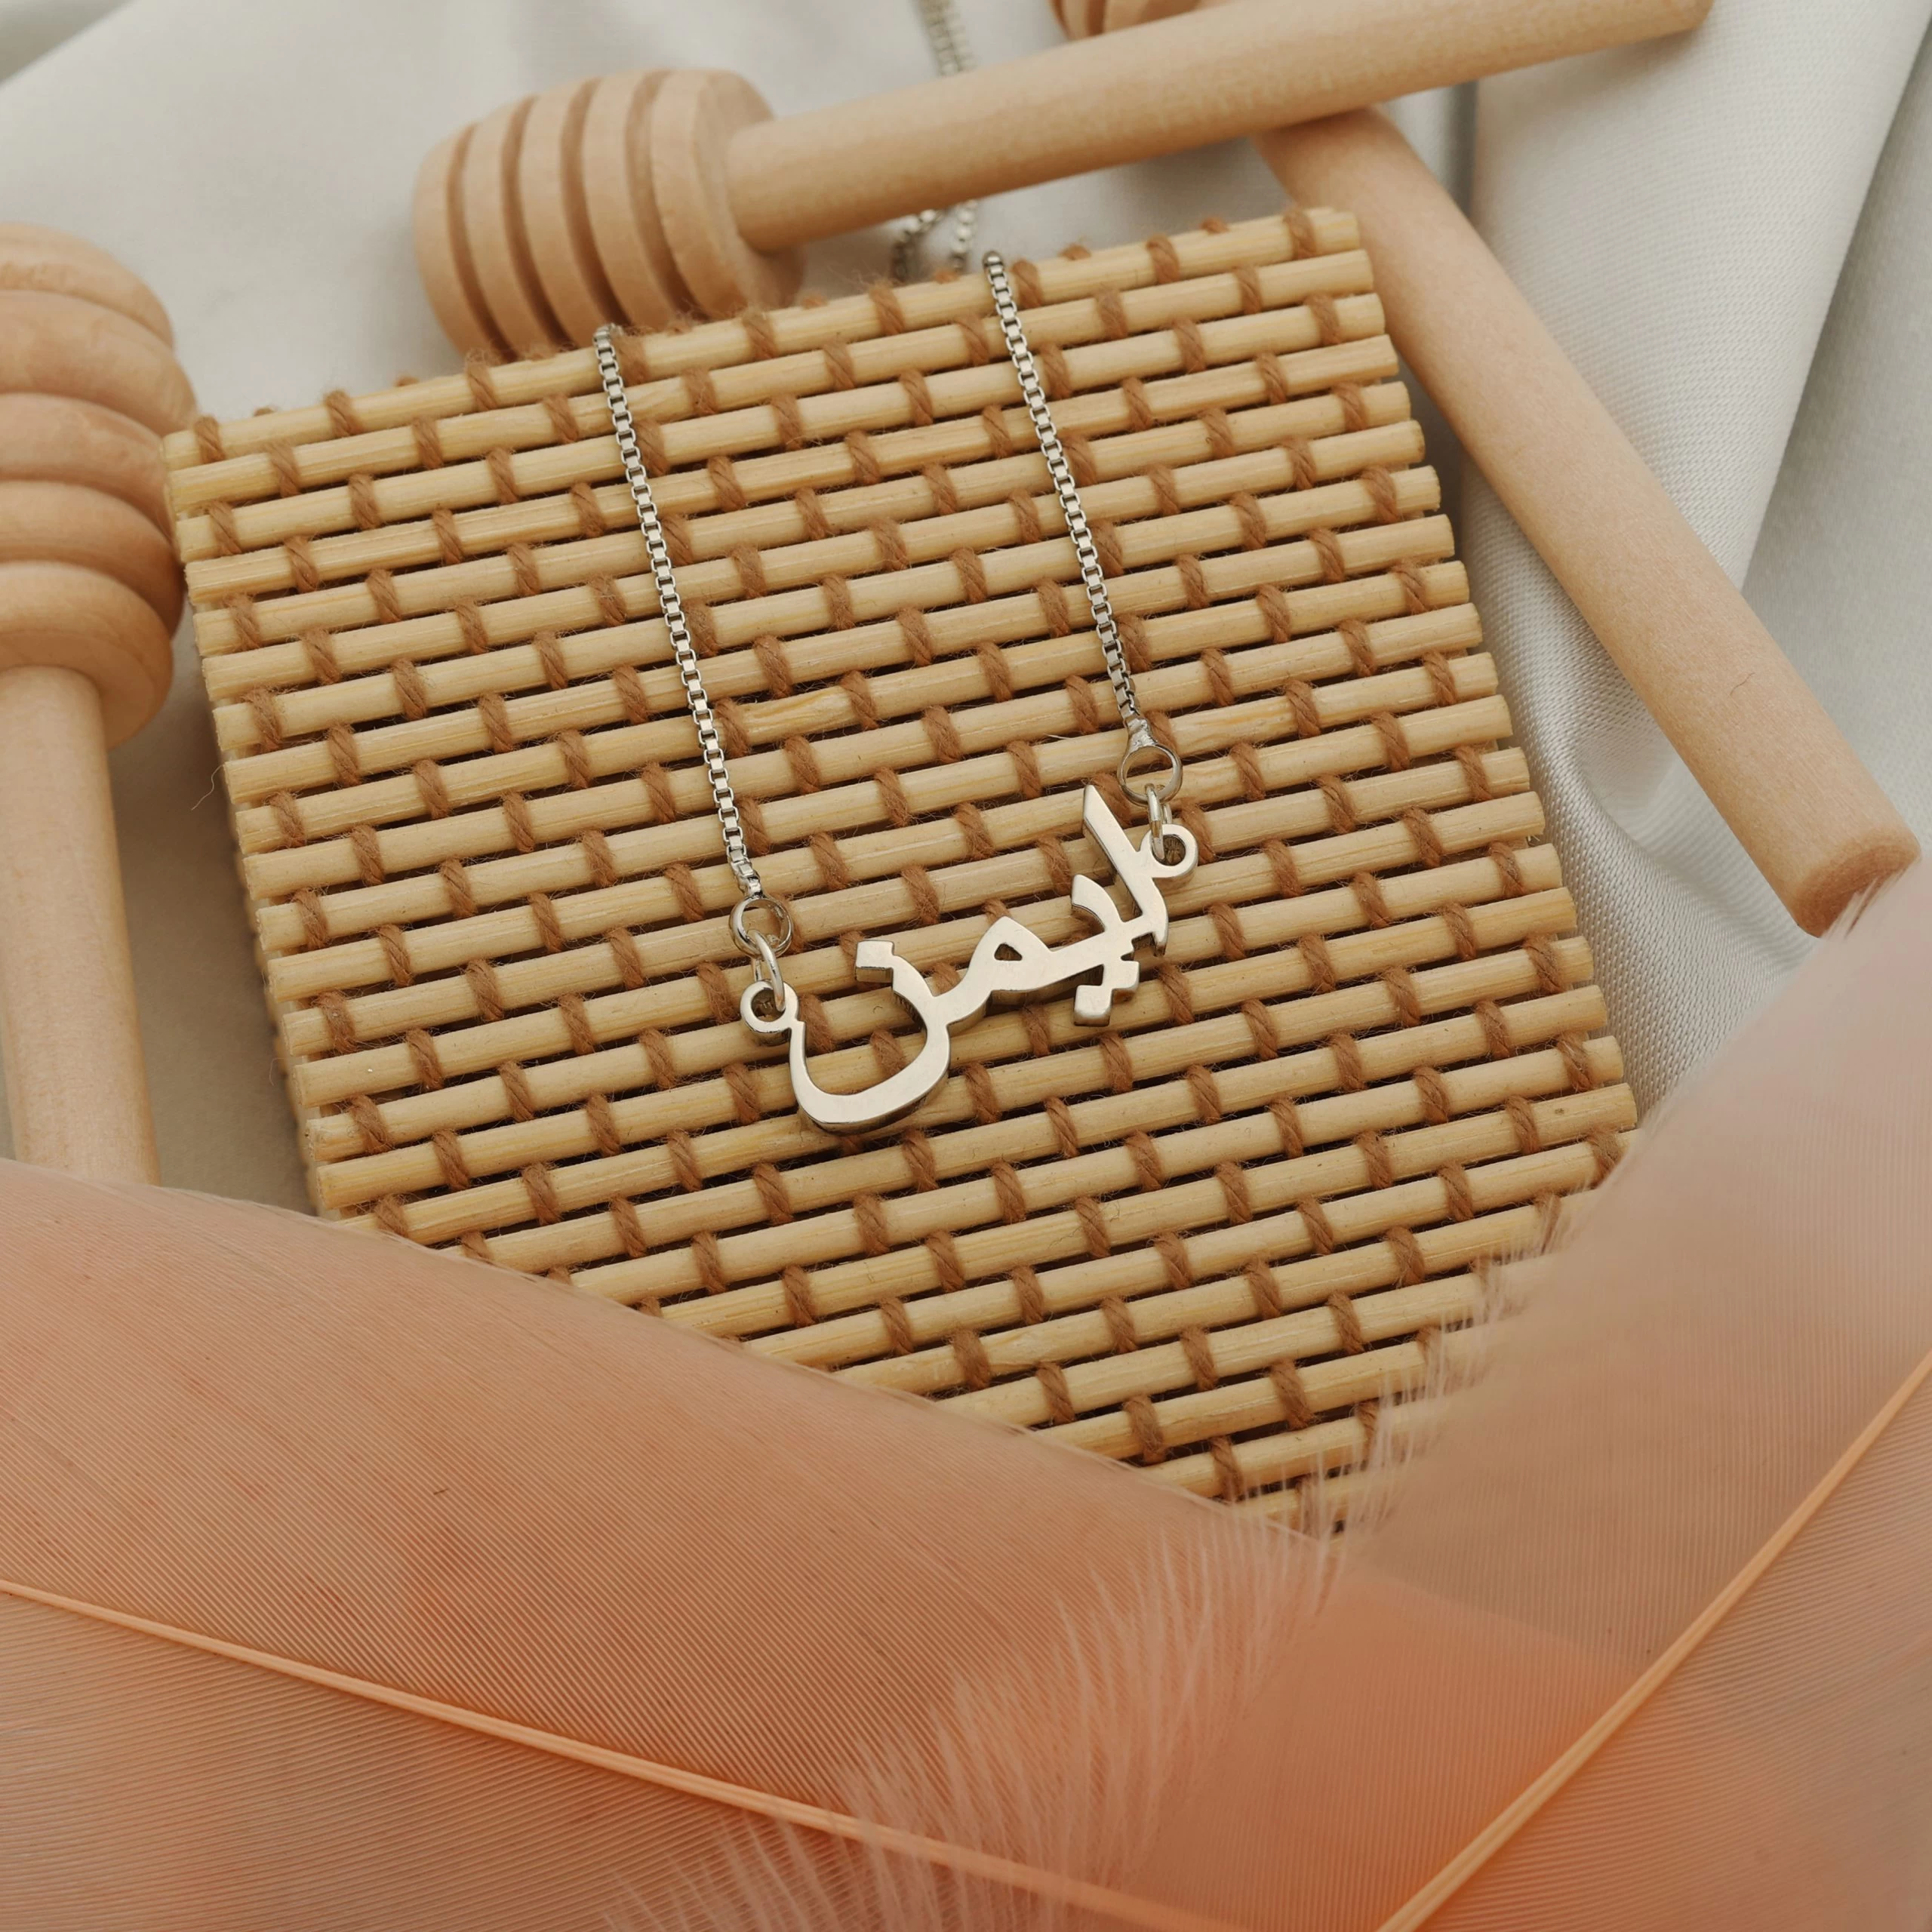 Customized Arabic Name Necklace in 14K Gold | Customize Yours Now! -  Monograms NYC